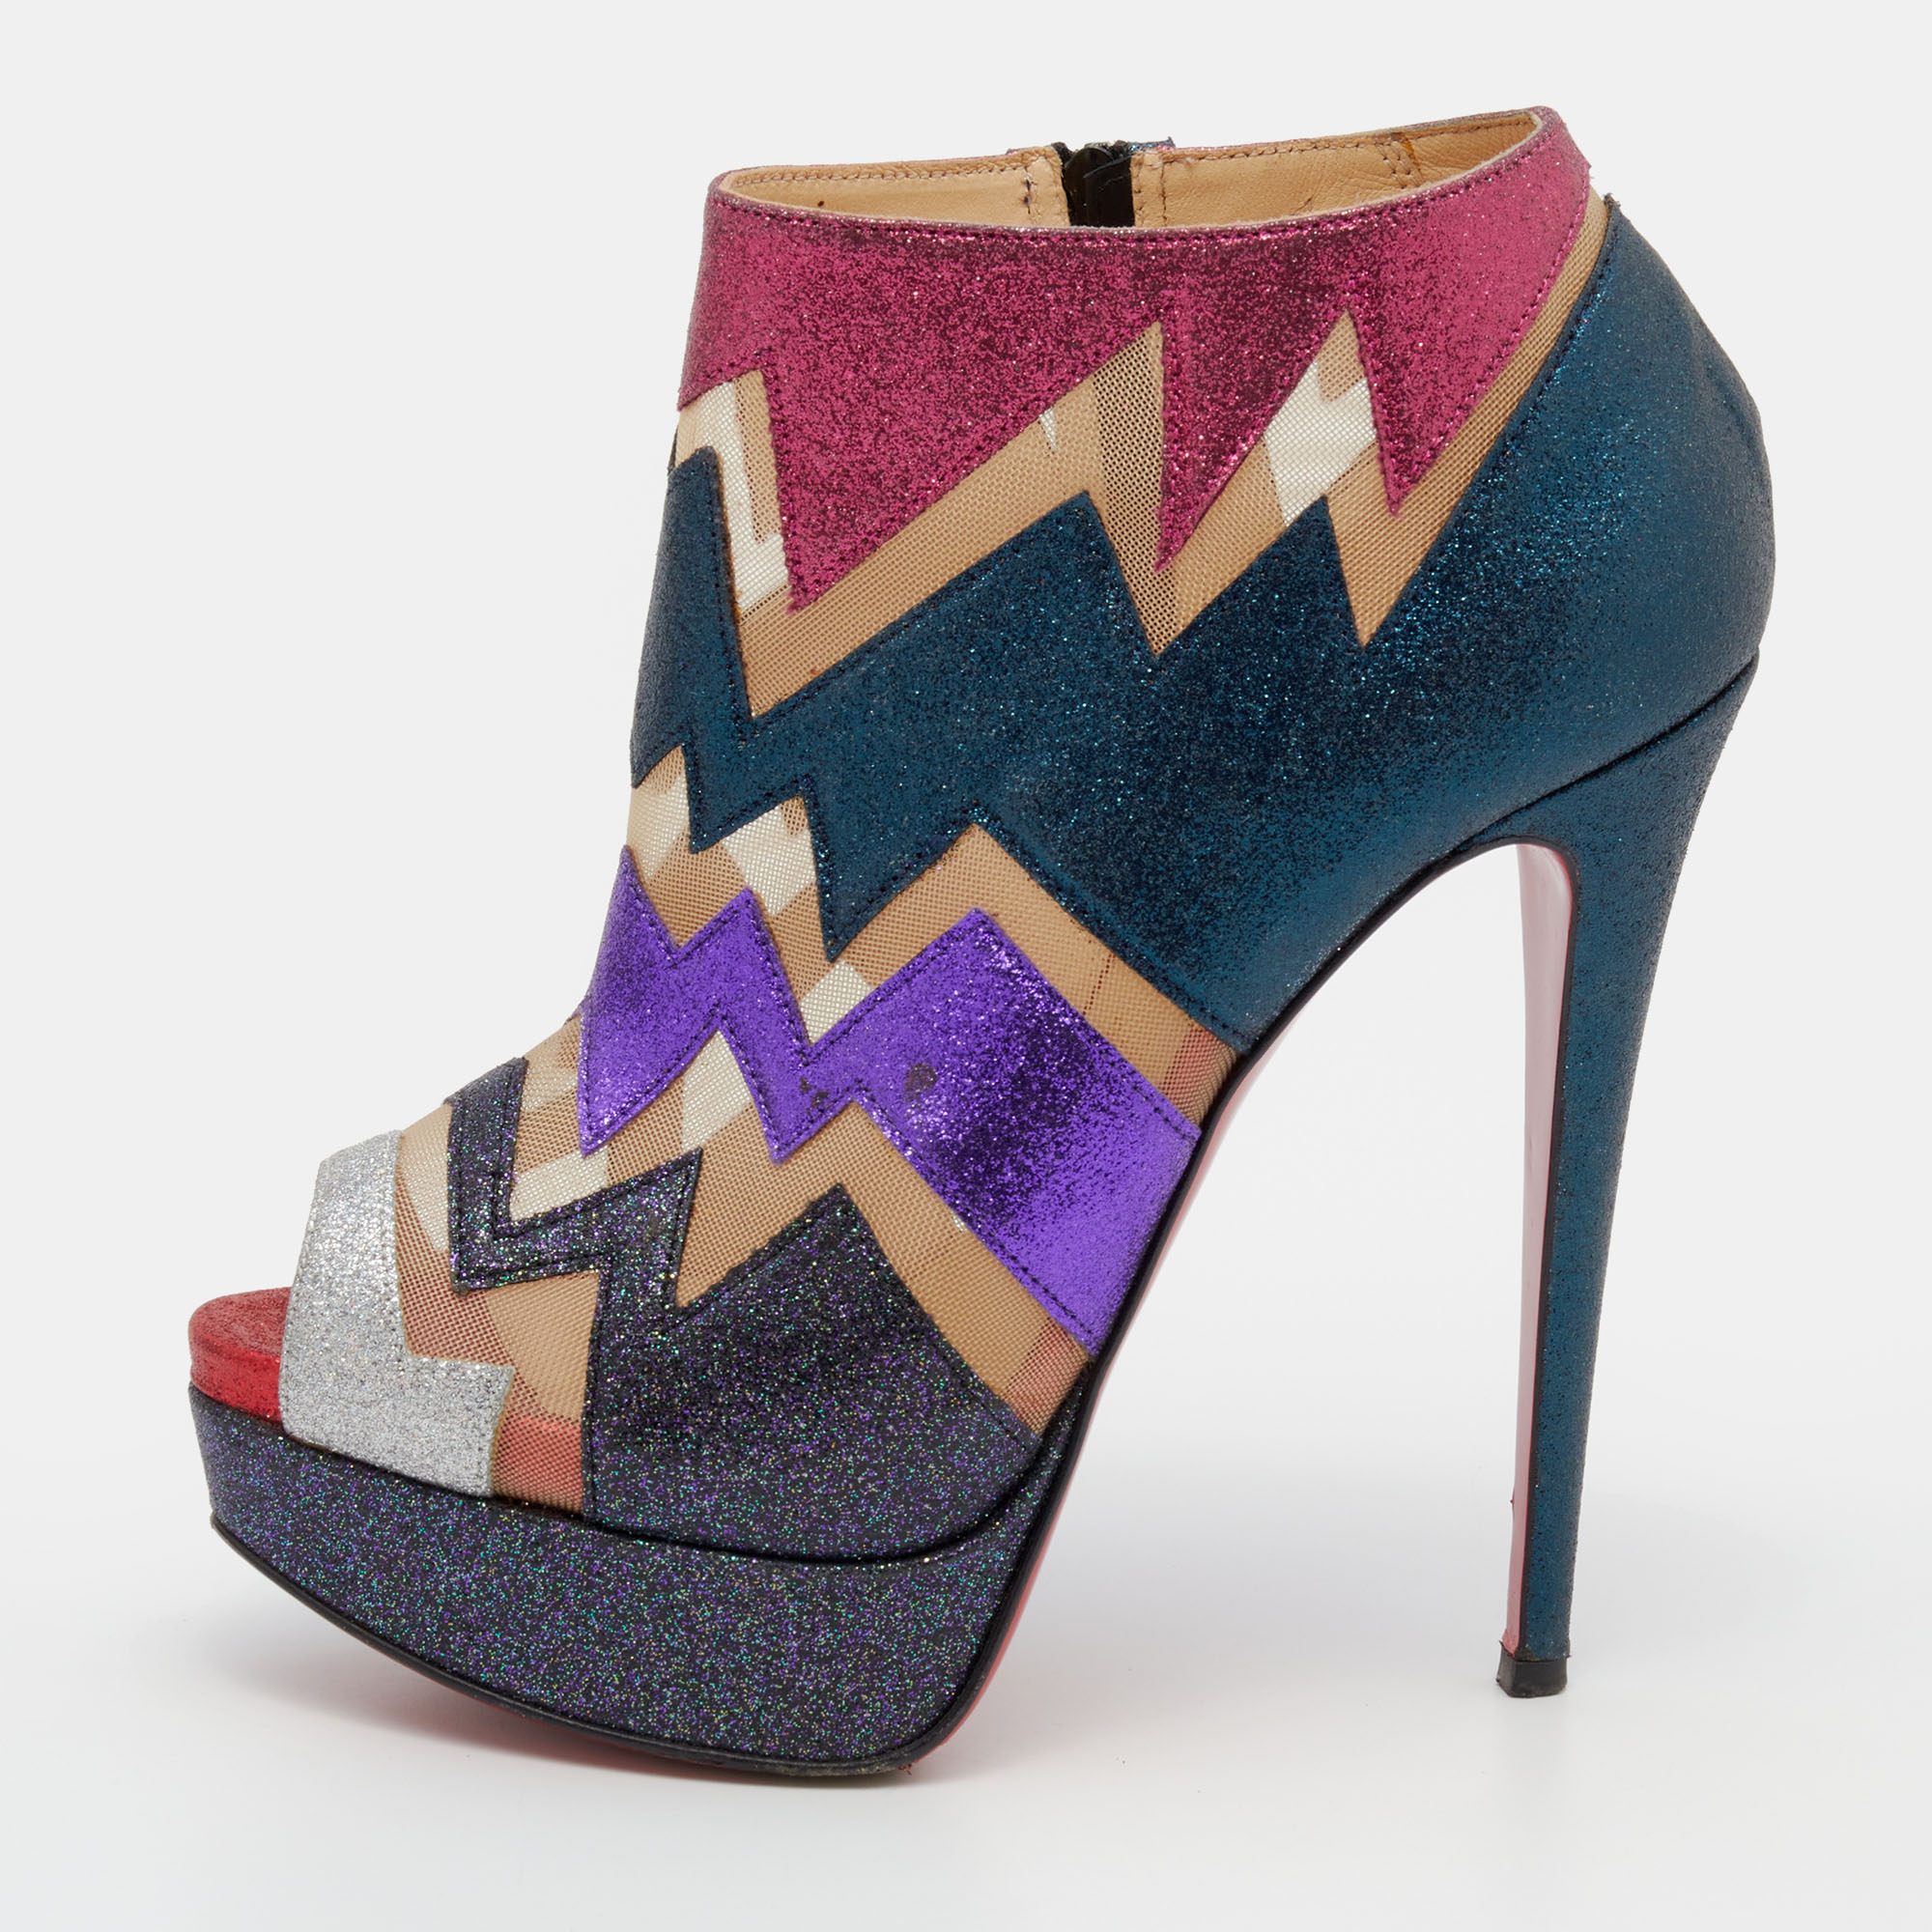 Christian Louboutin Multicolor Glitter And Mesh Ziggy Peep-Toe Ankle Booties Size37.5